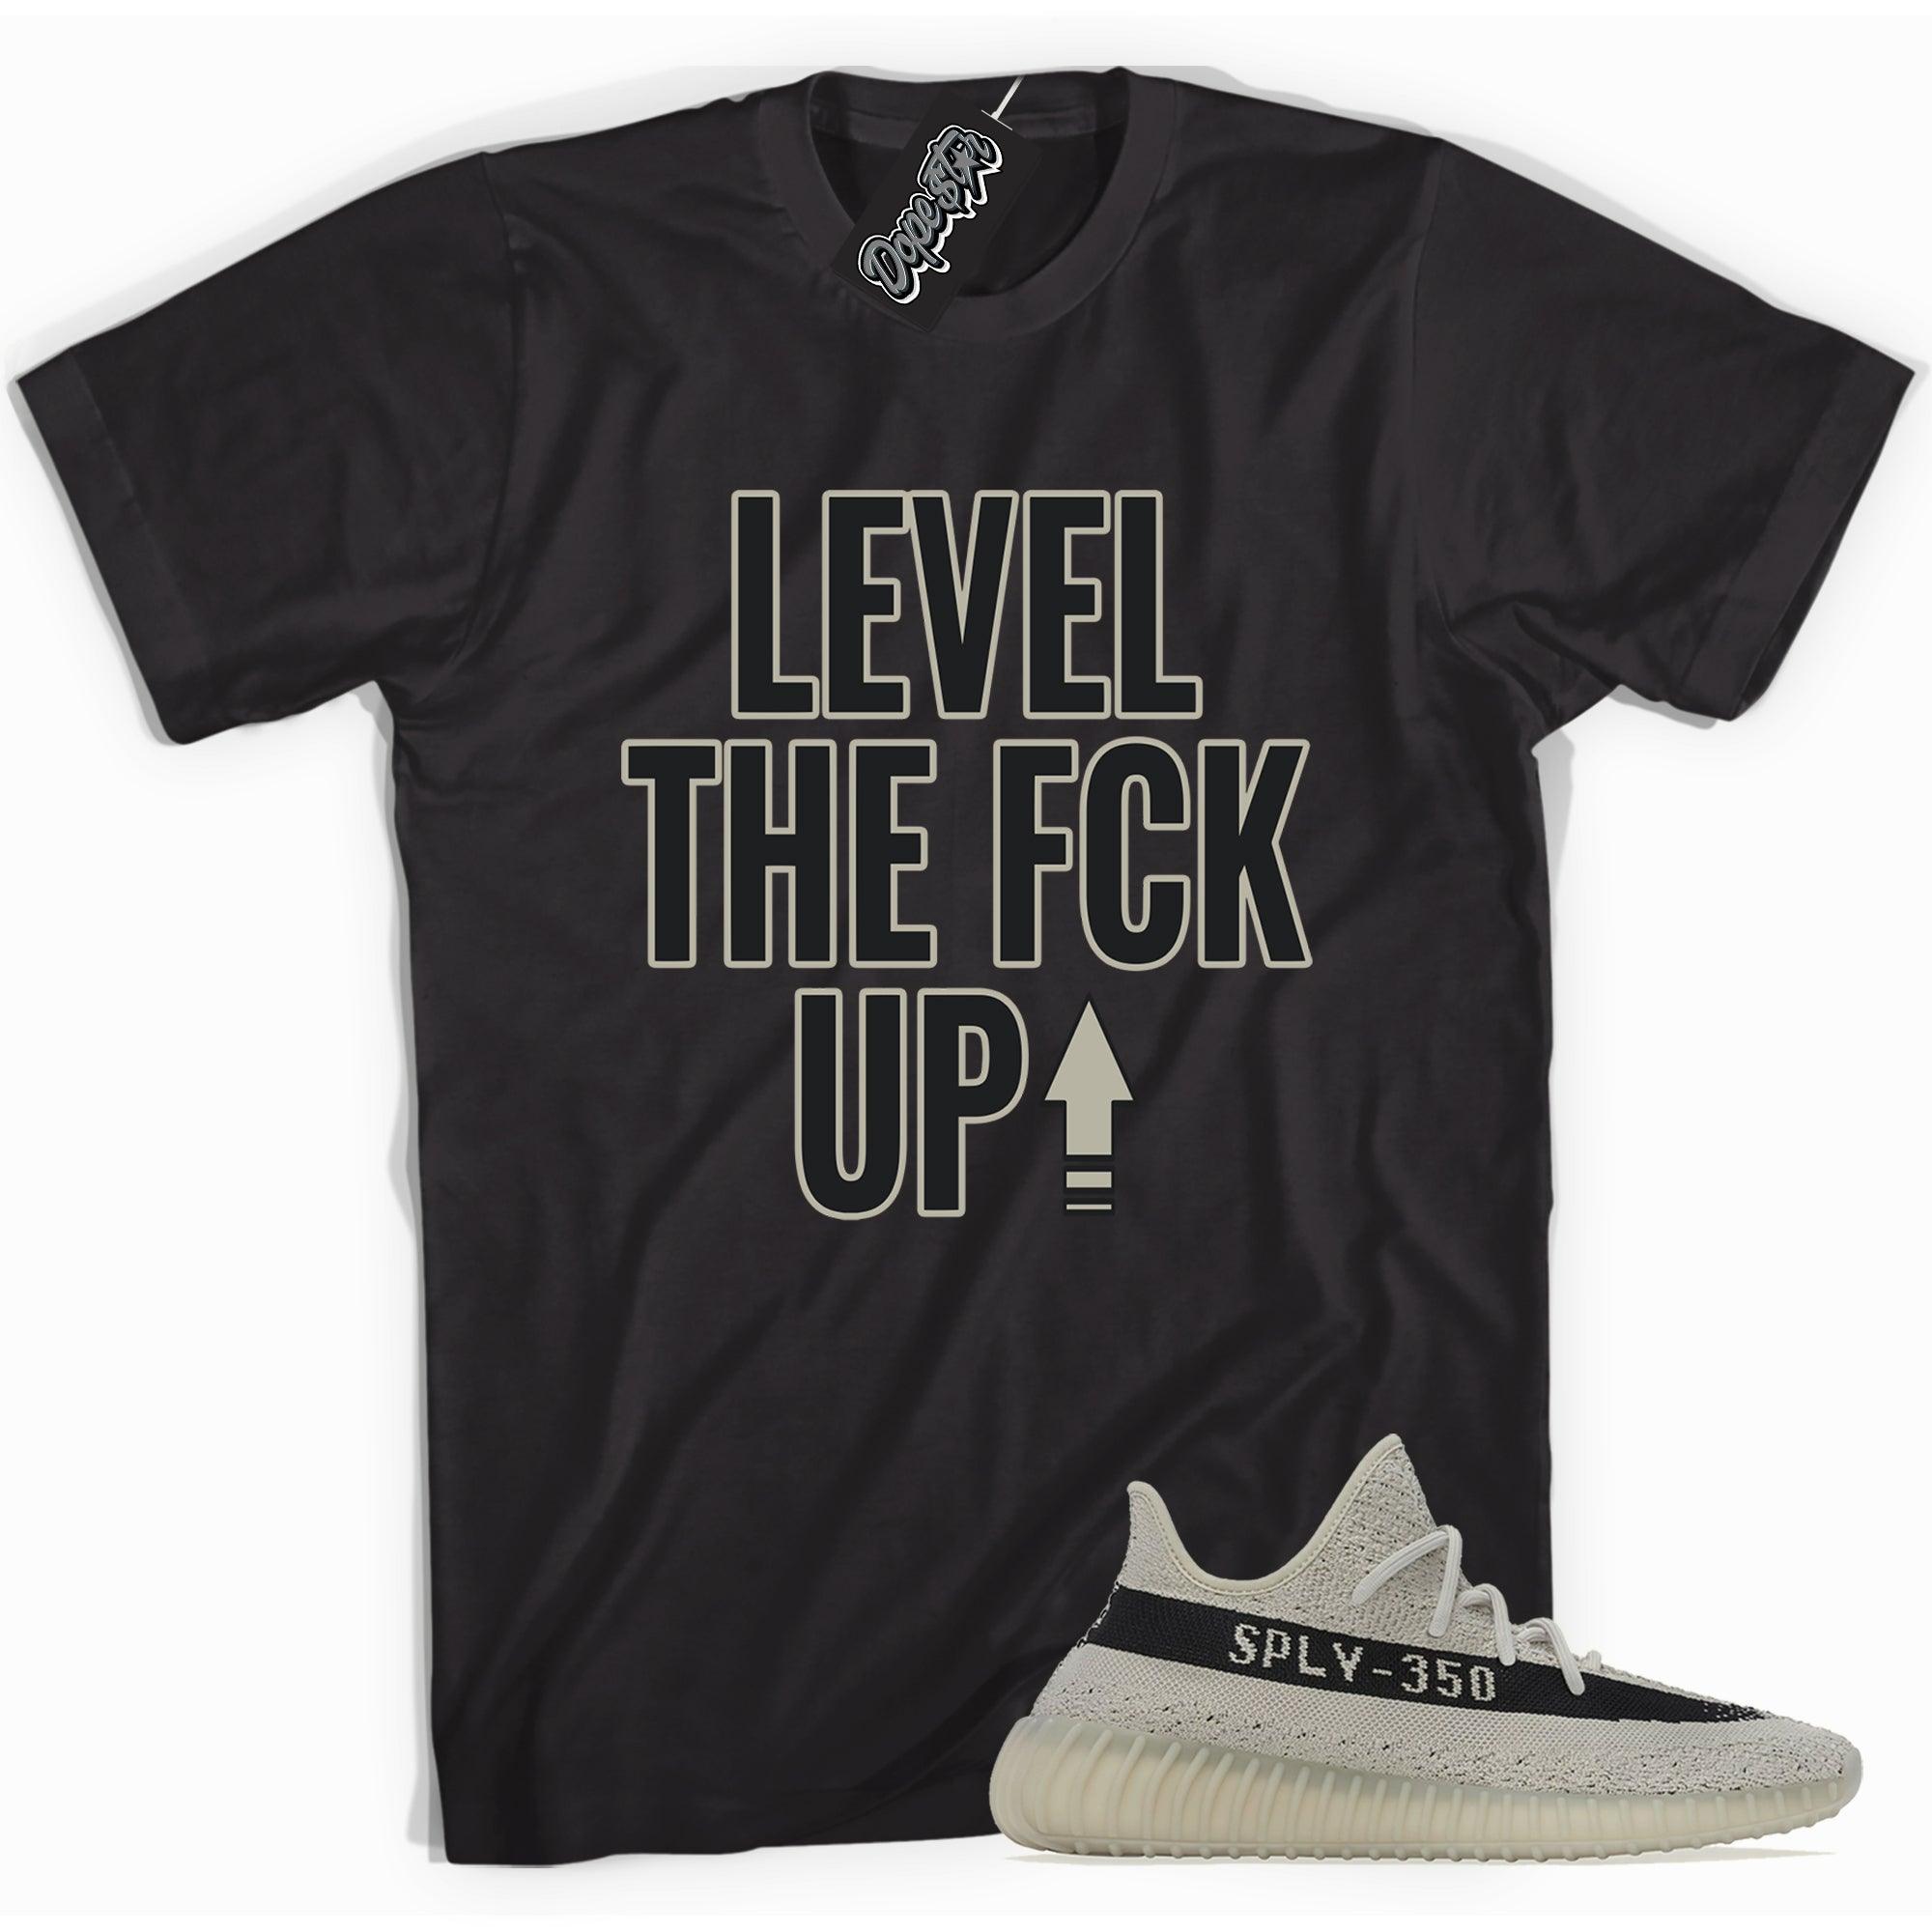 Cool black graphic tee with 'Level Up' print, that perfectly matches Adidas Yeezy Boost 350 V2 Slate sneakers.